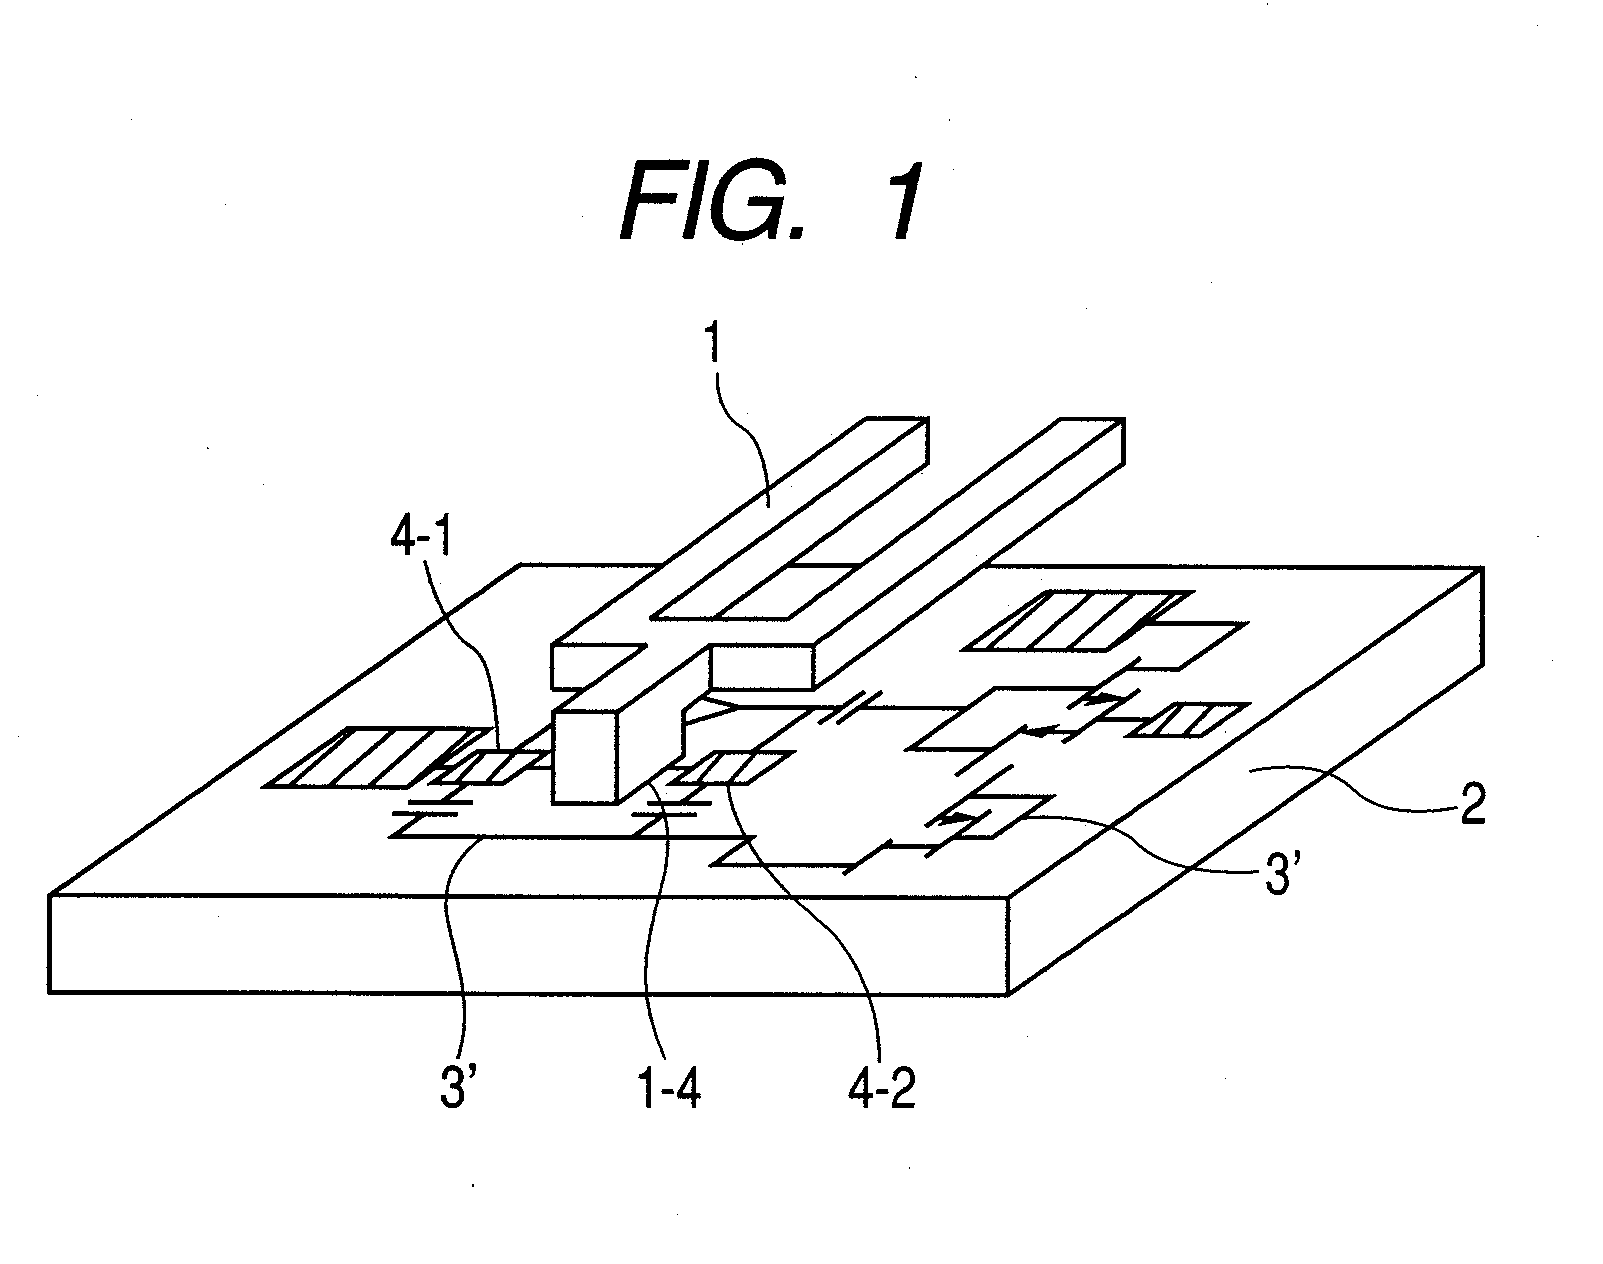 Thin film tuning-fork type inflection resonator and electric signal processing element